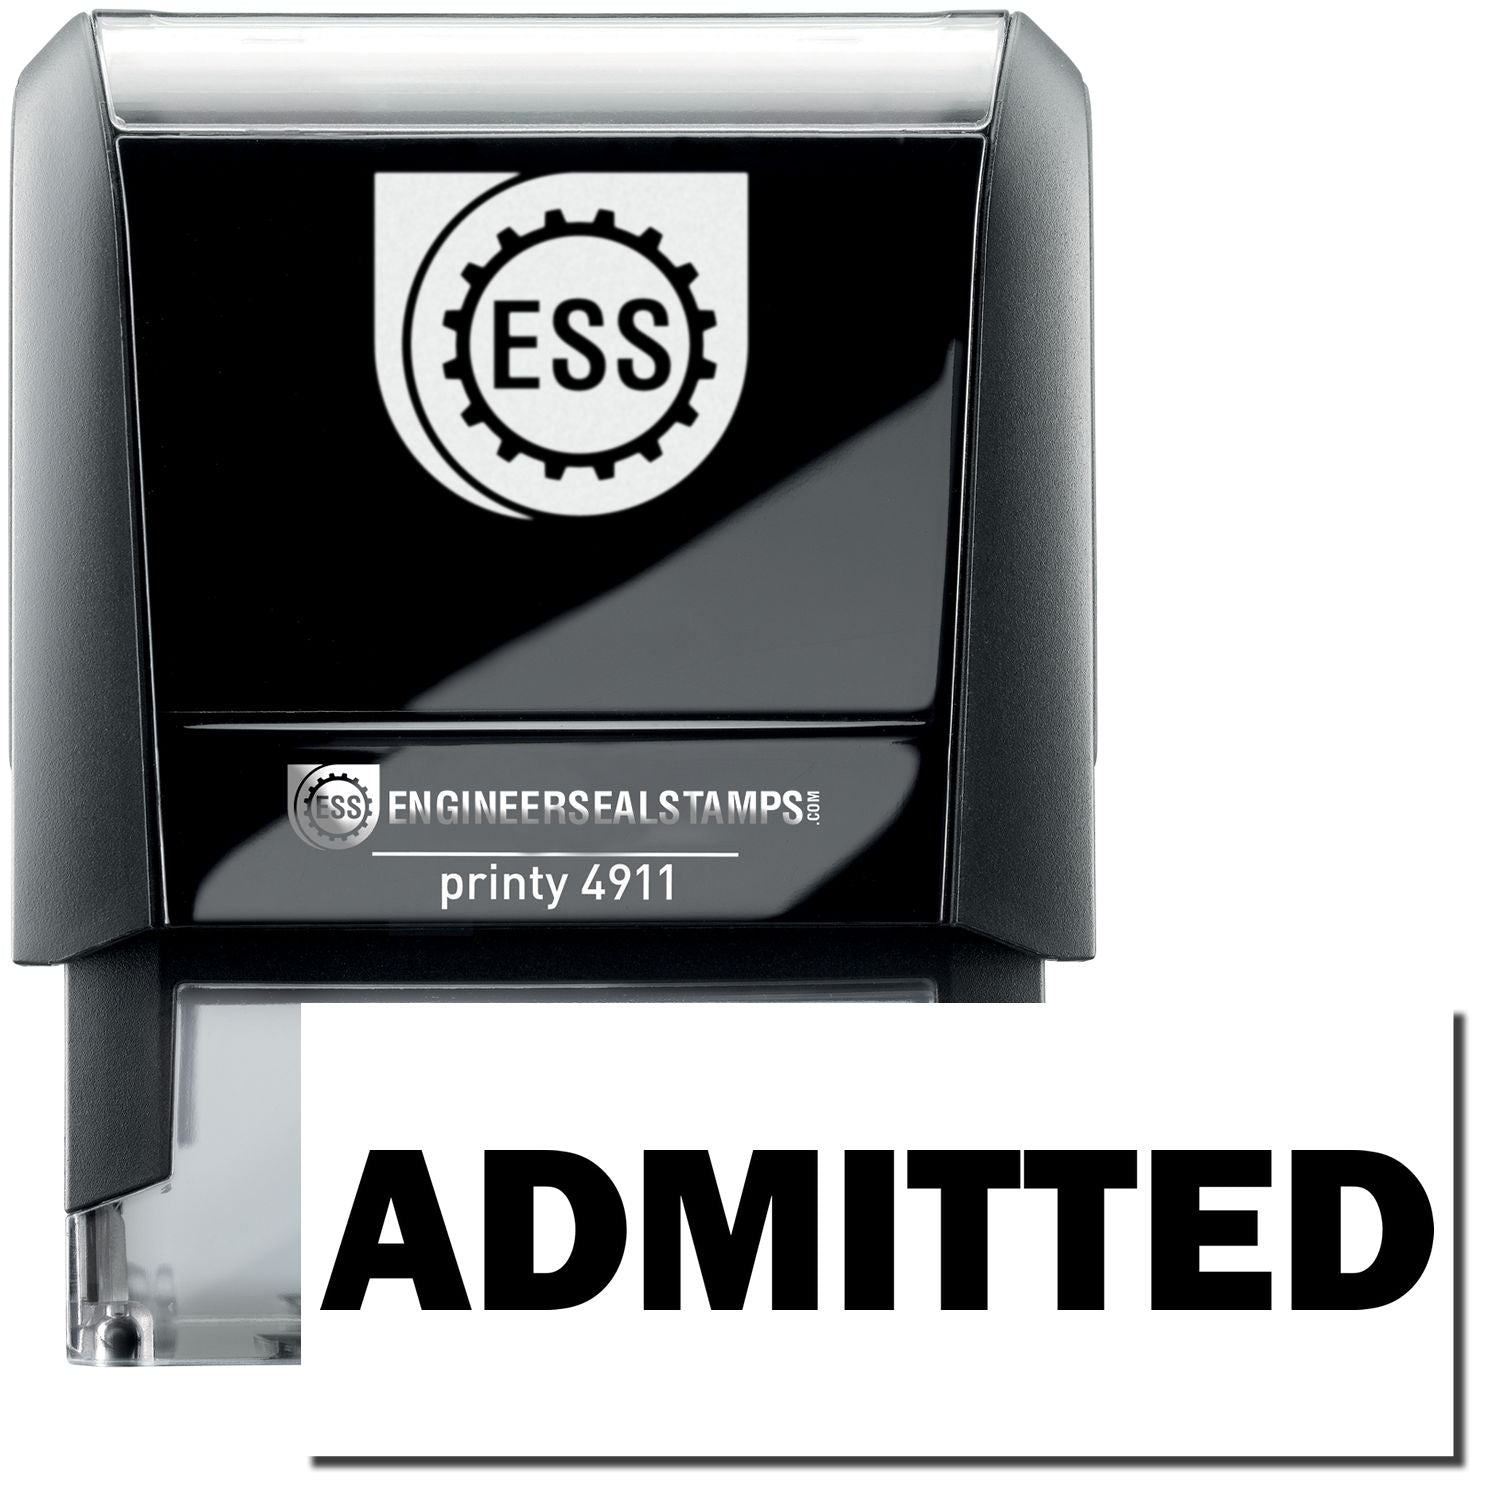 A self-inking stamp with a stamped image showing how the text "ADMITTED" is displayed after stamping.